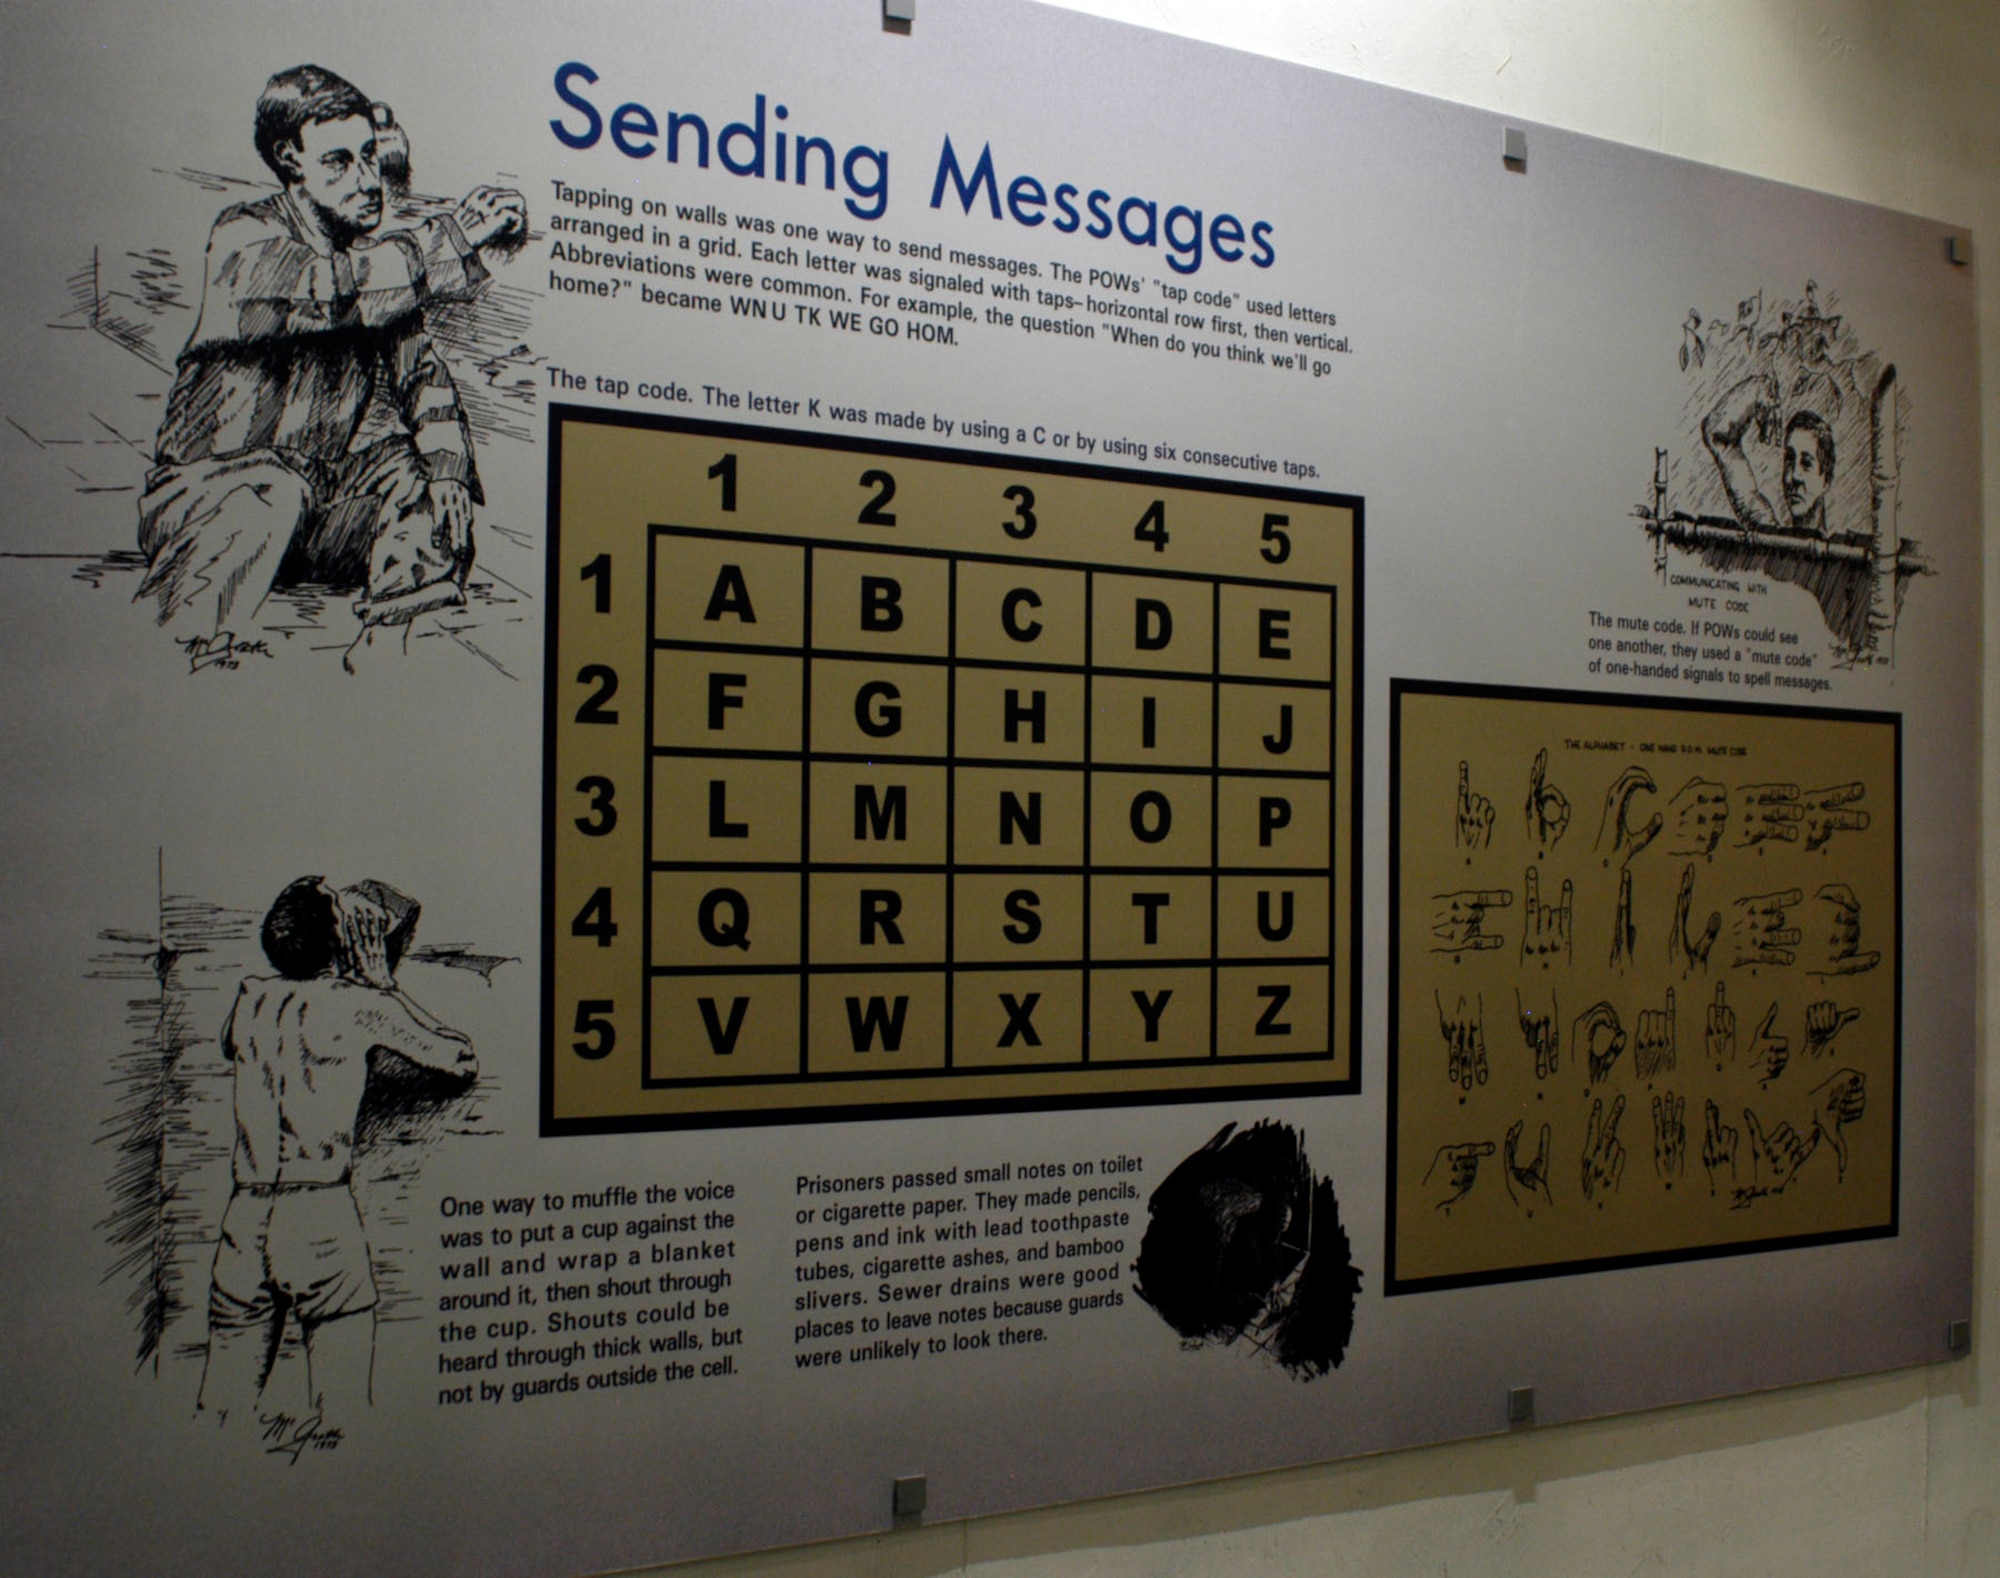 DAYTON, Ohio - Examples of how POWs communicated are shown on this panel in the Return with Honor: American Prisoners of War in Southeast Asia exhibit in the Southeast Asia War Gallery at the National Museum of the U.S. Air Force. (U.S. Air Force photo)